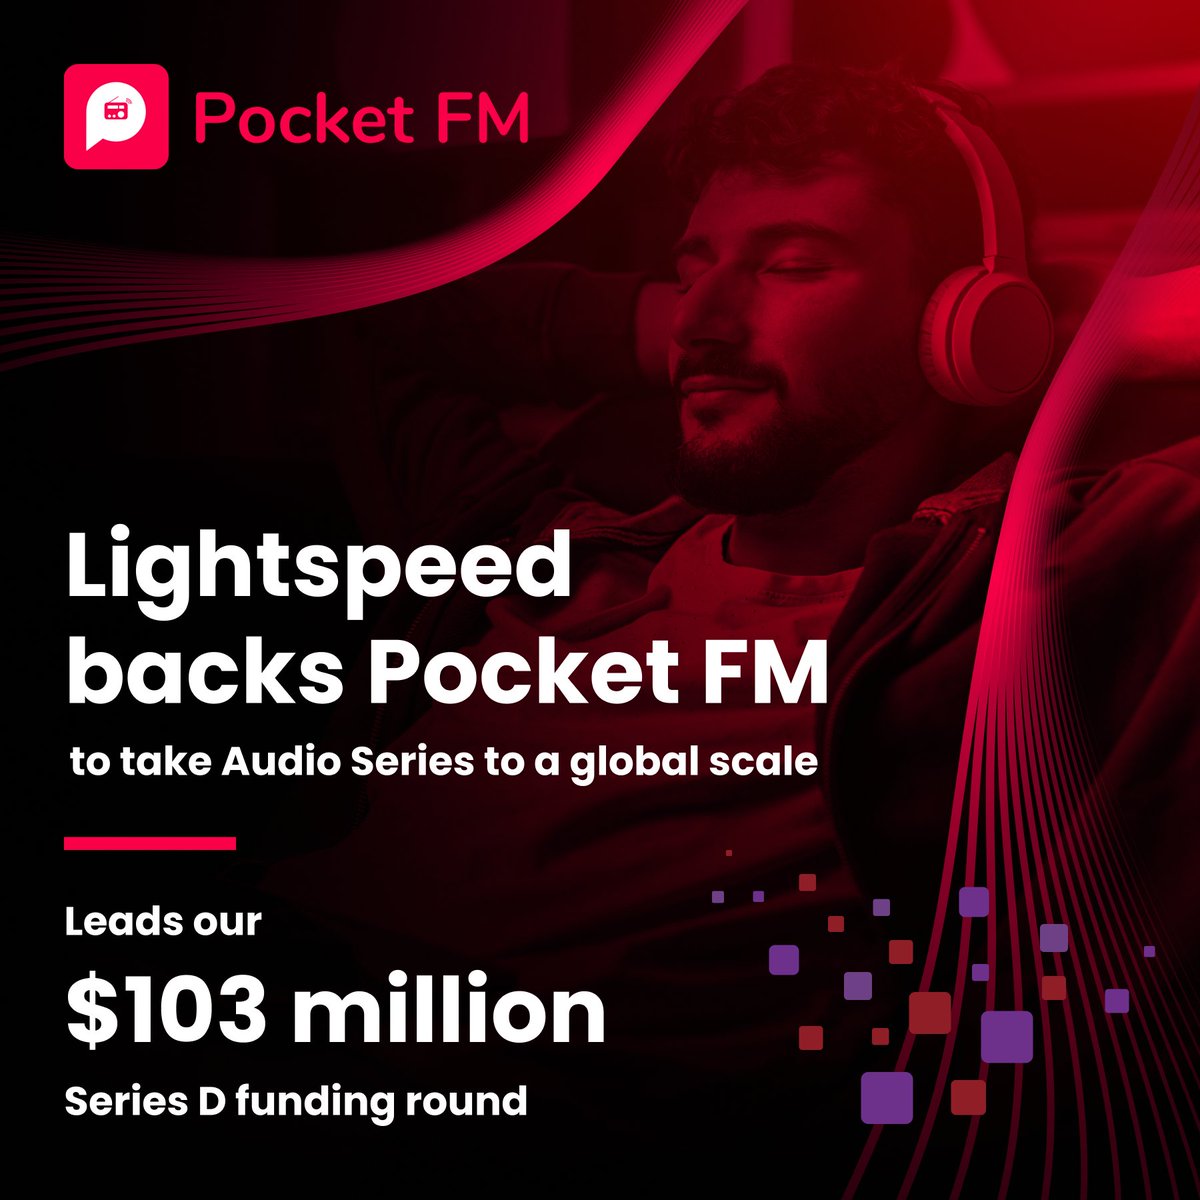 Pocket FM raises $103M in Series D funding Today, we're excited to announce a massive milestone for Pocket FM – we've just secured $103 million in Series D funding! This incredible achievement not only speaks volumes about the faith investors have in our vision but also fuels…